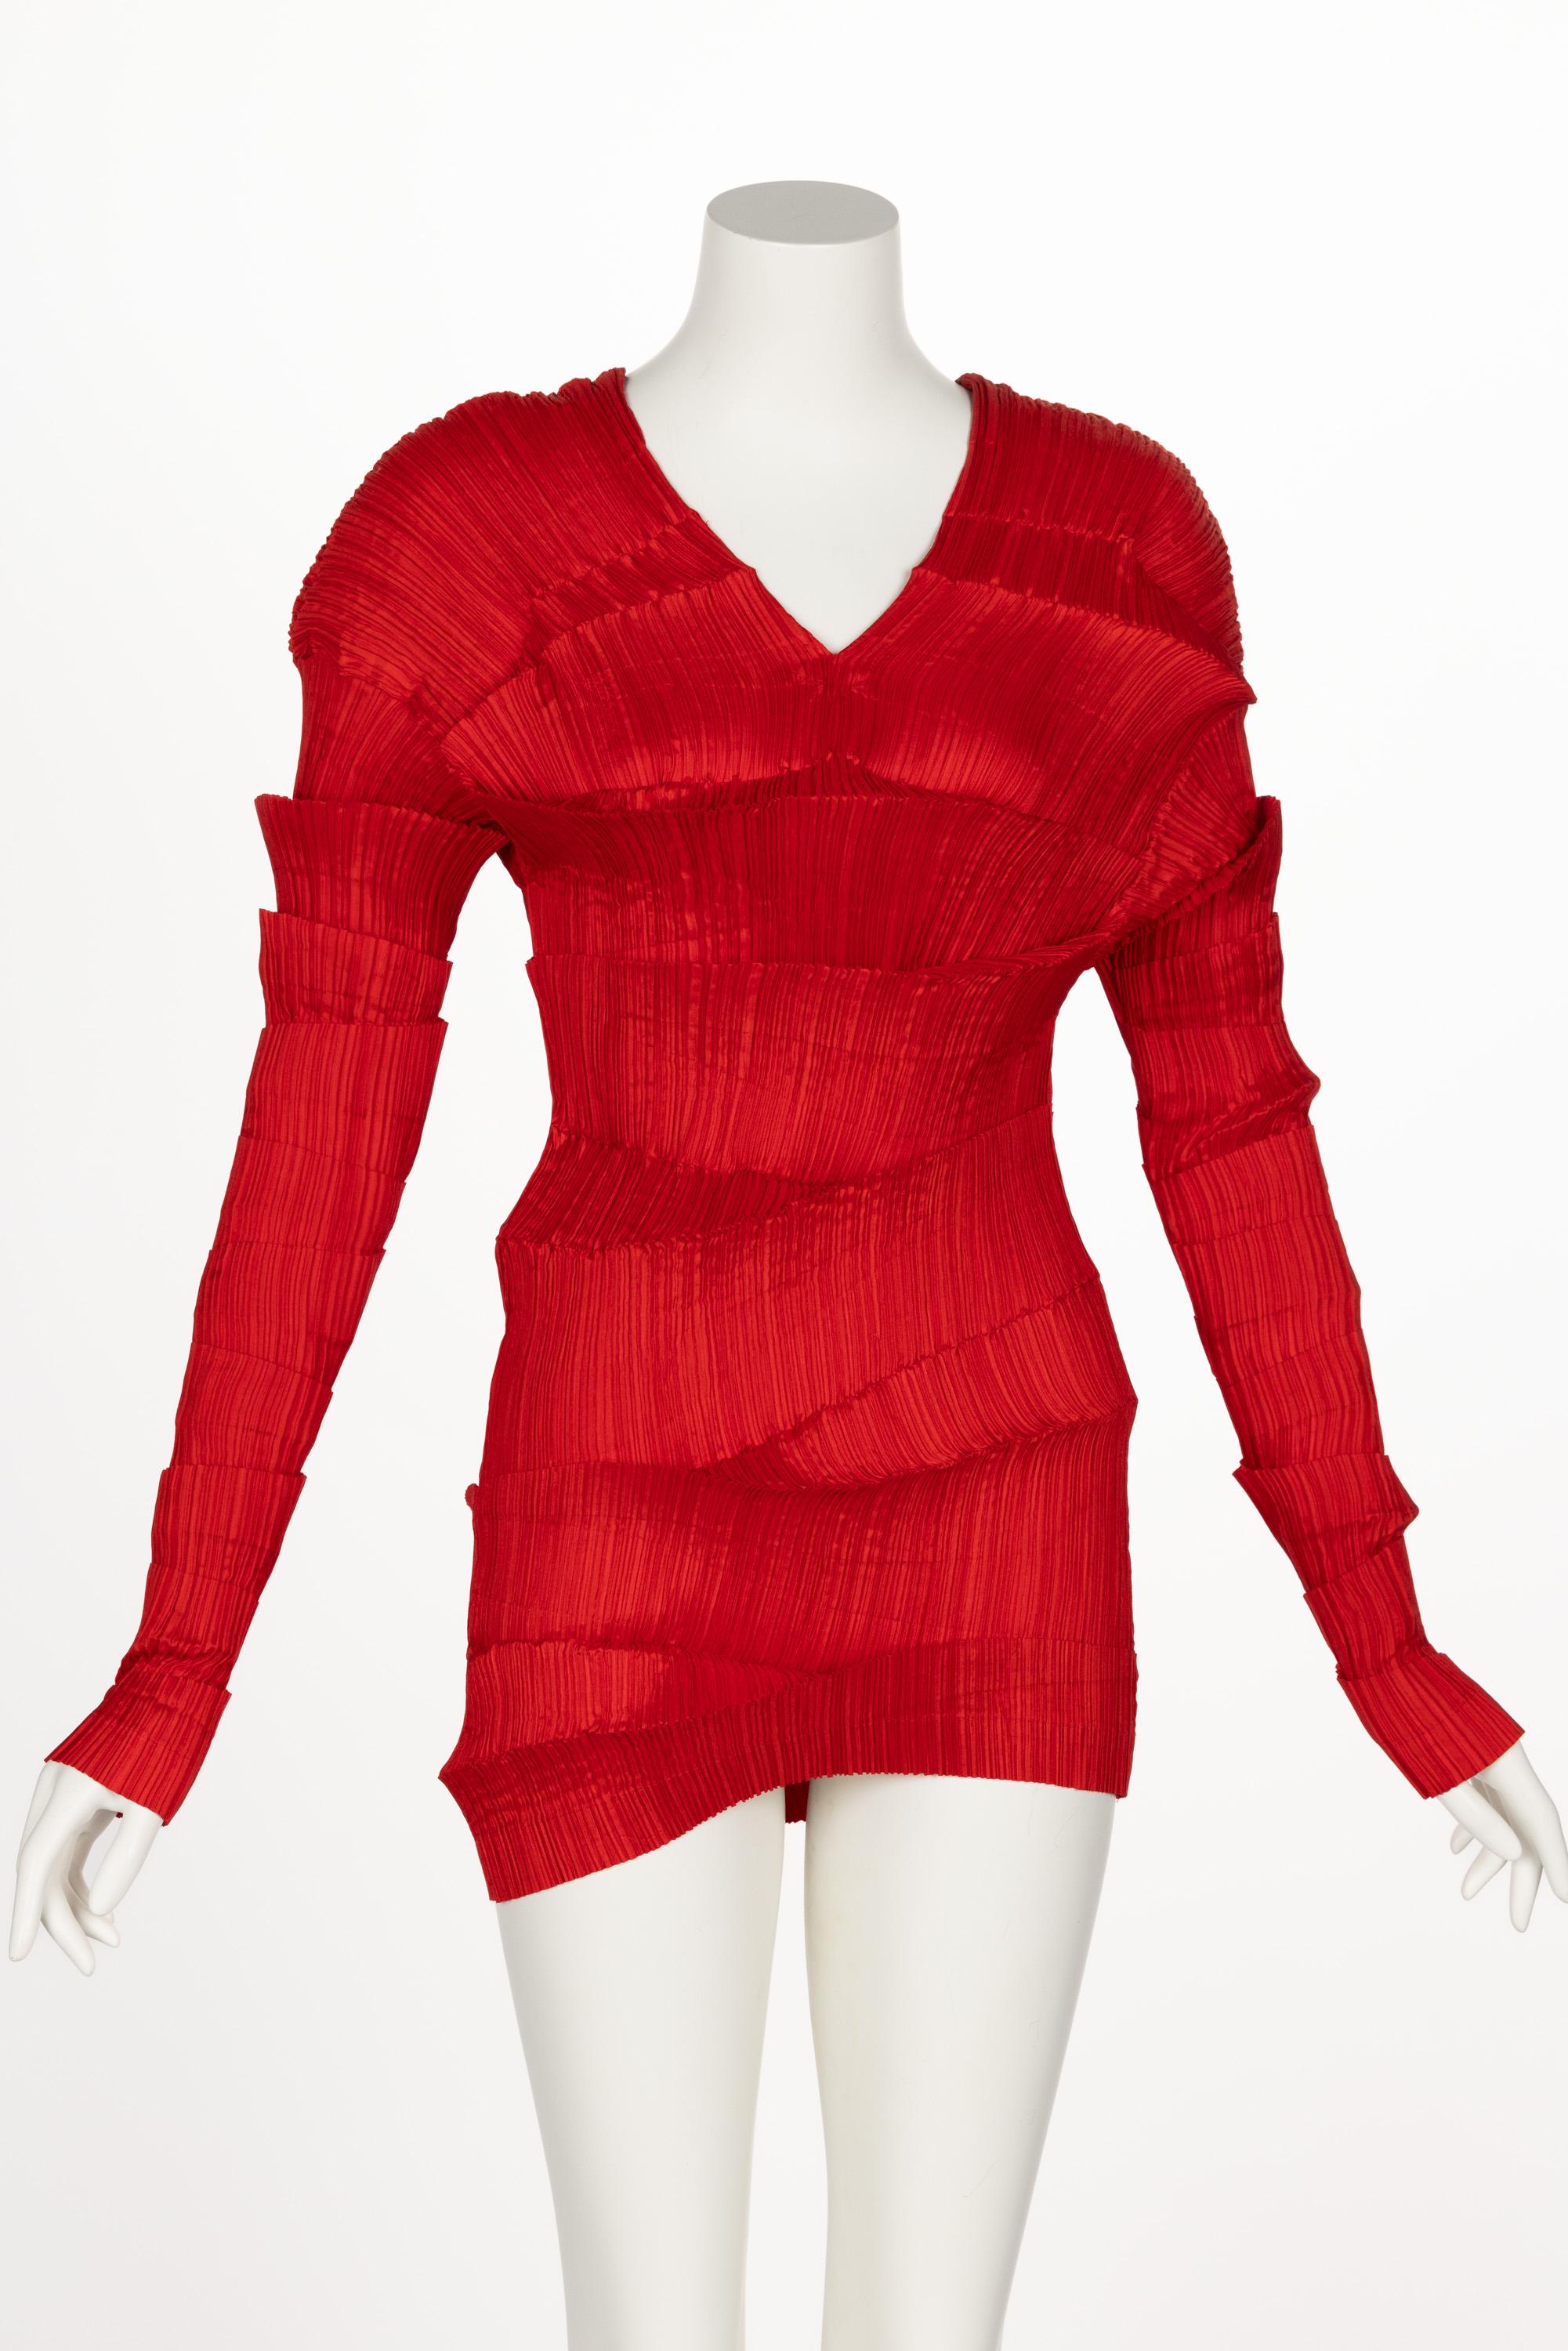 Incredible 1990s Issey Miyake Pleated Red Top & Skirt Ensemble For Sale 4